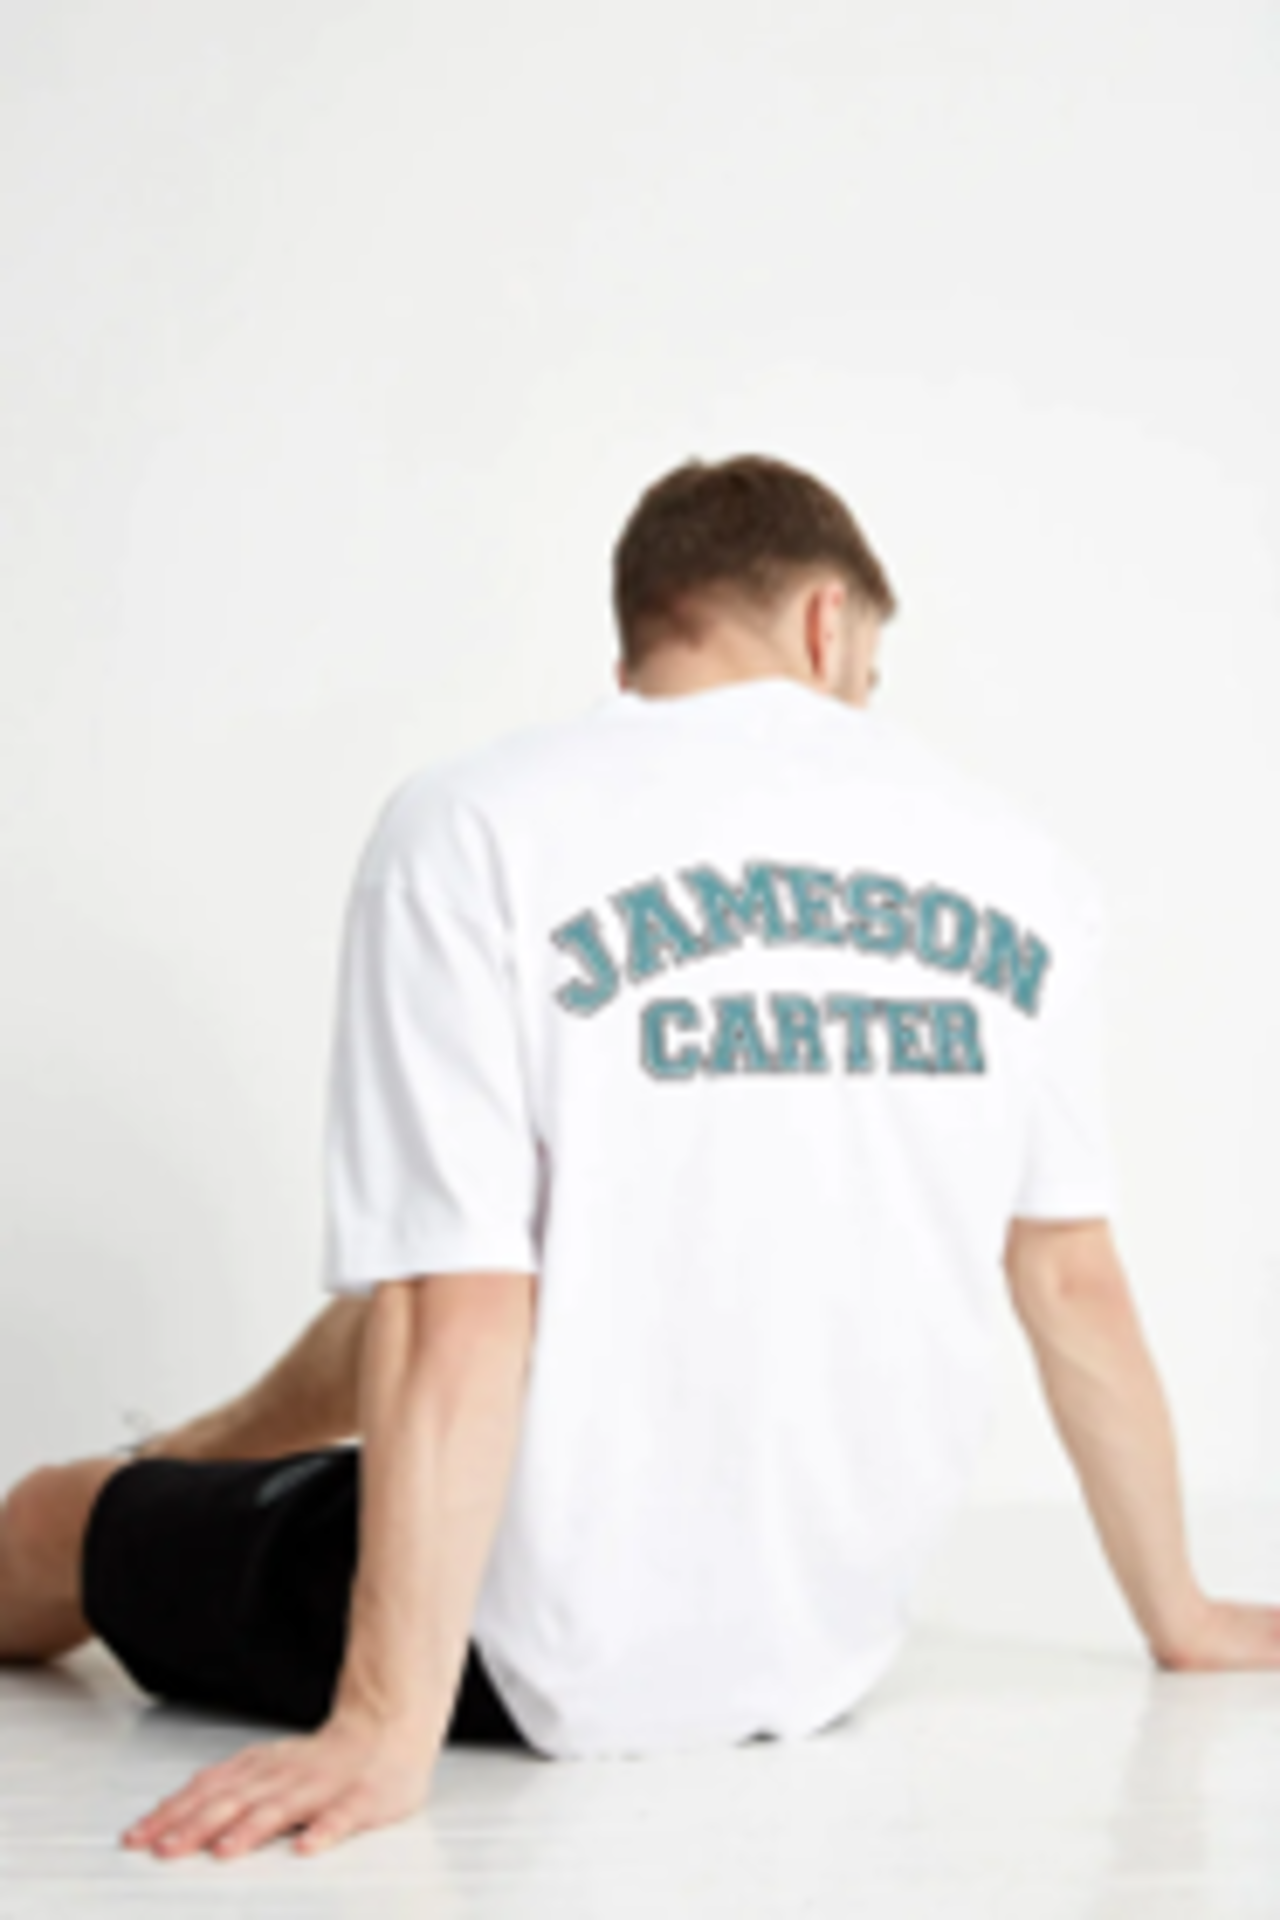 TRADE LOT 100 x NEW MIXED ITEMS OF JAMESON CARTER STOCK. TO INCLUDE ITEMS SUCH AS: JACKETS, - Image 8 of 13